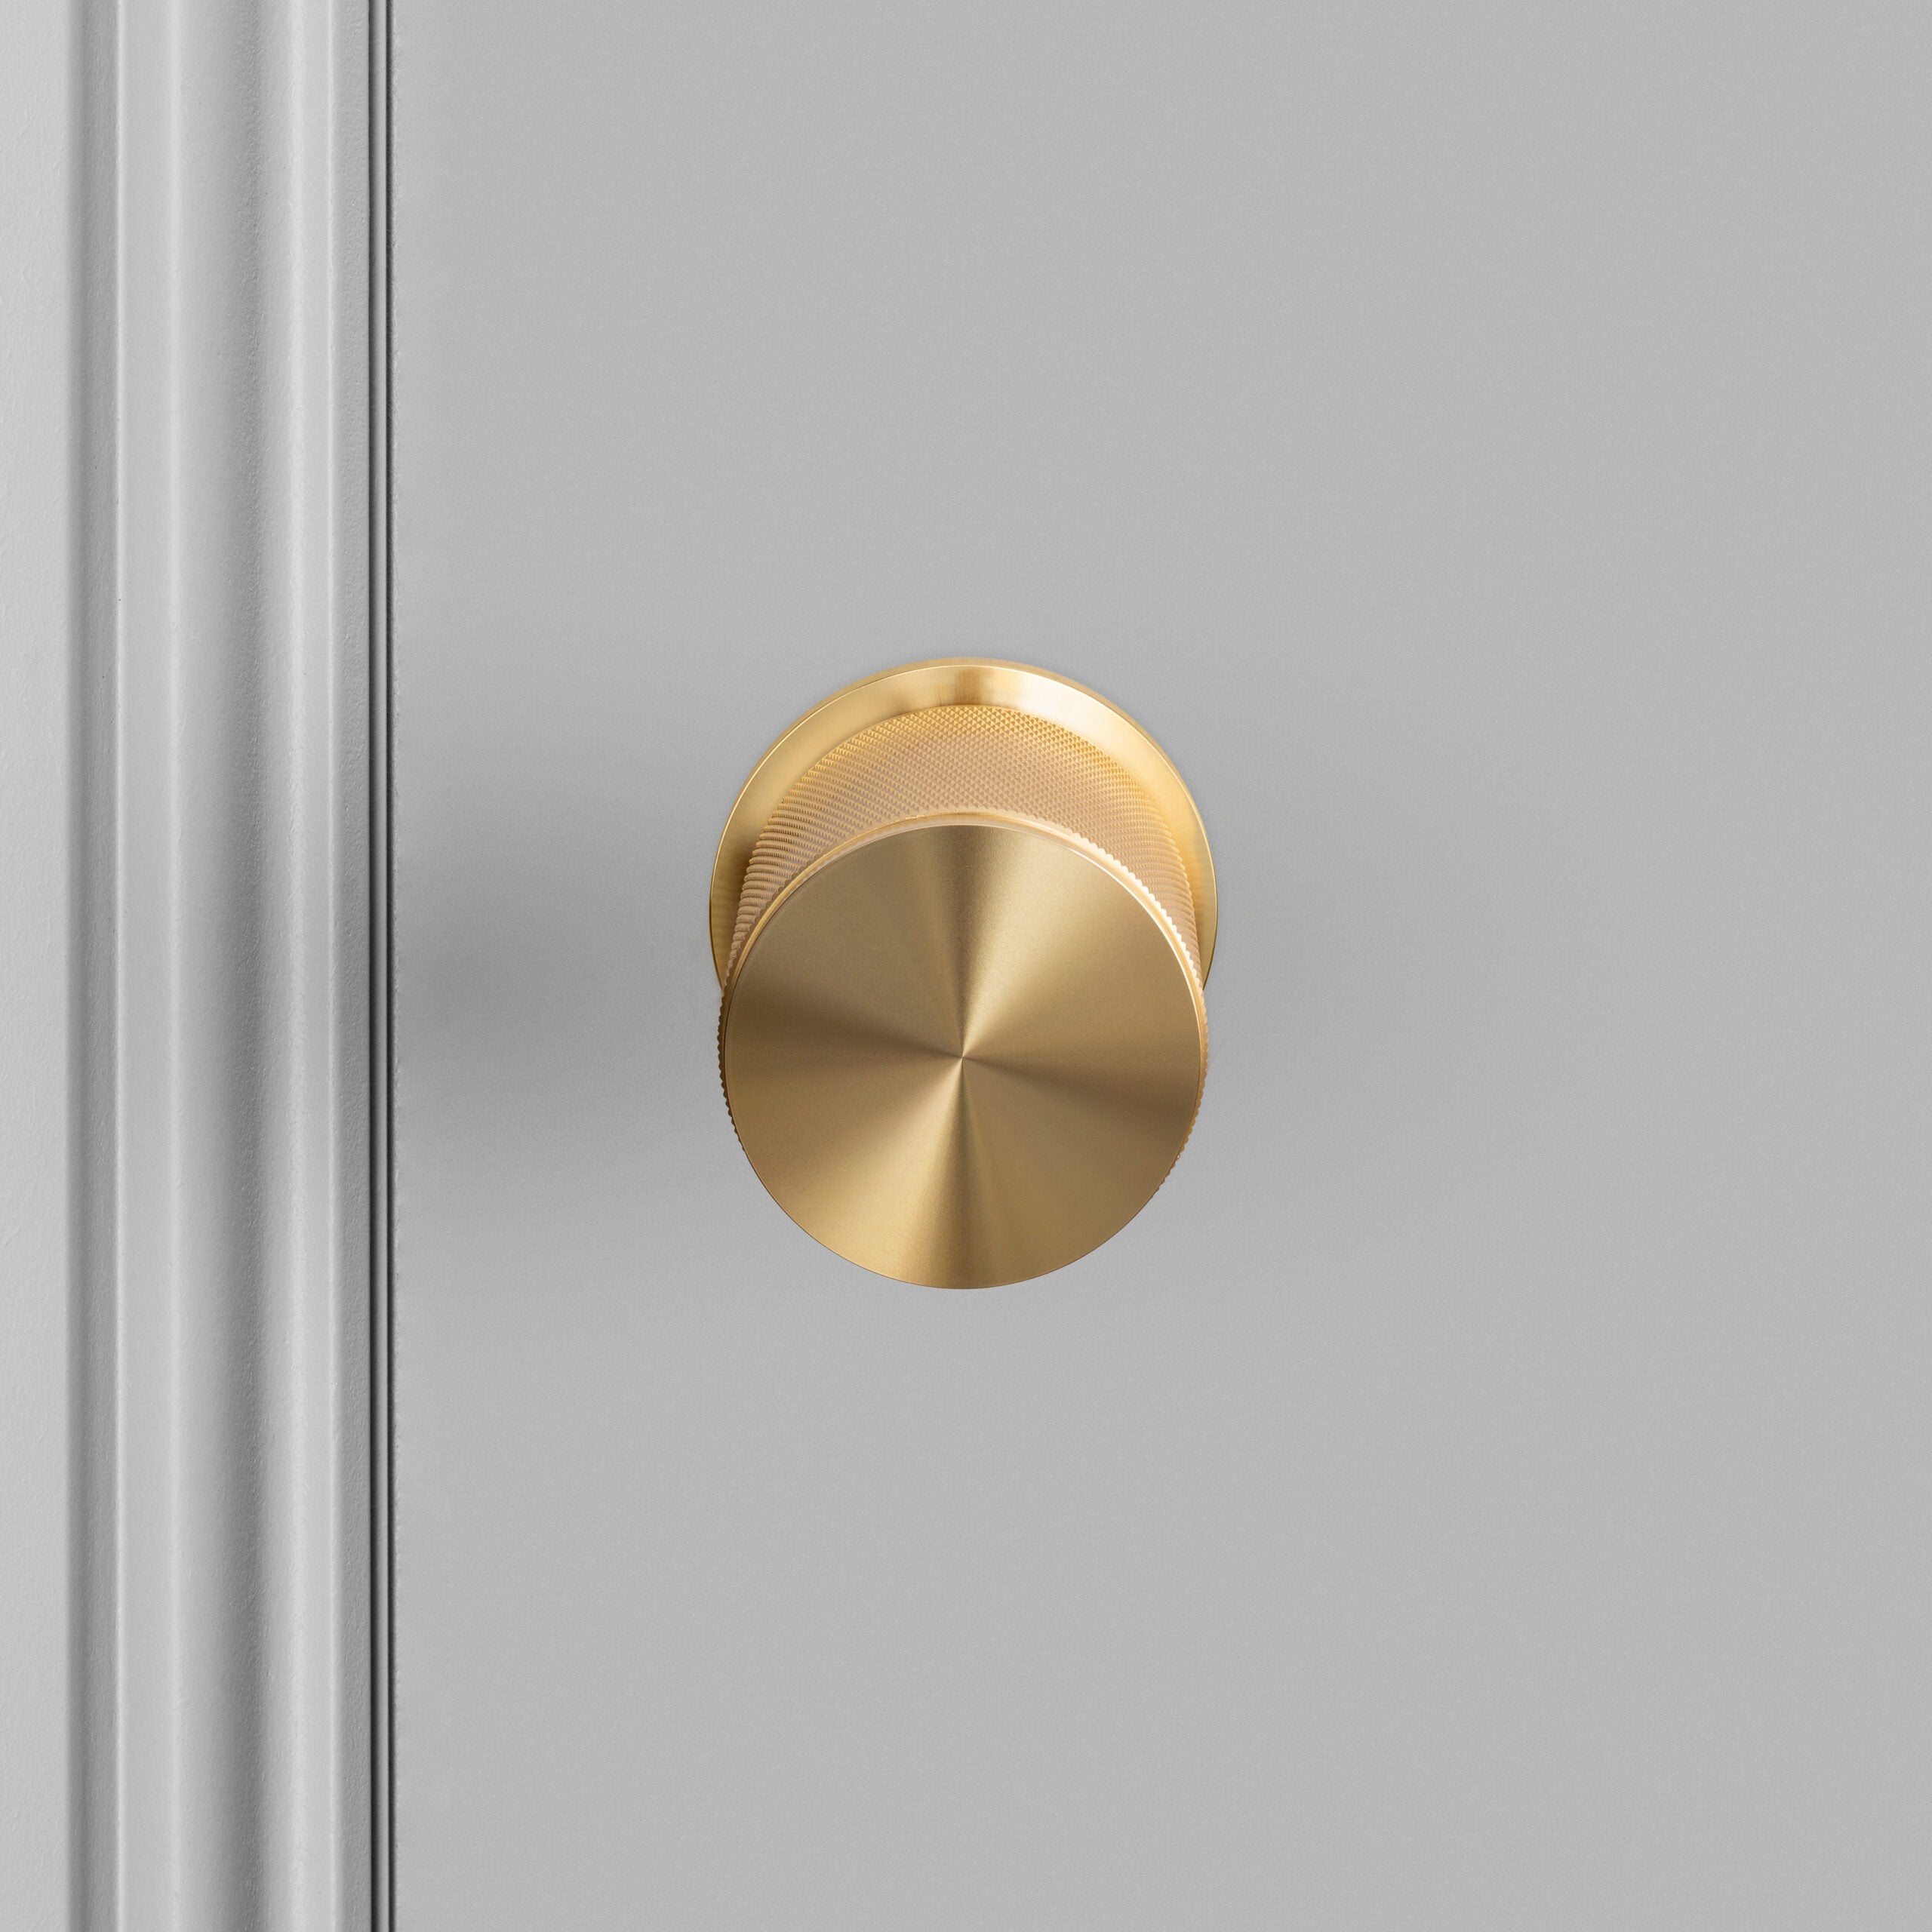 Buster + Punch Door Knob Single Sided, Cross Design, FIXED TYPE Hardware Buster + Punch Brass  